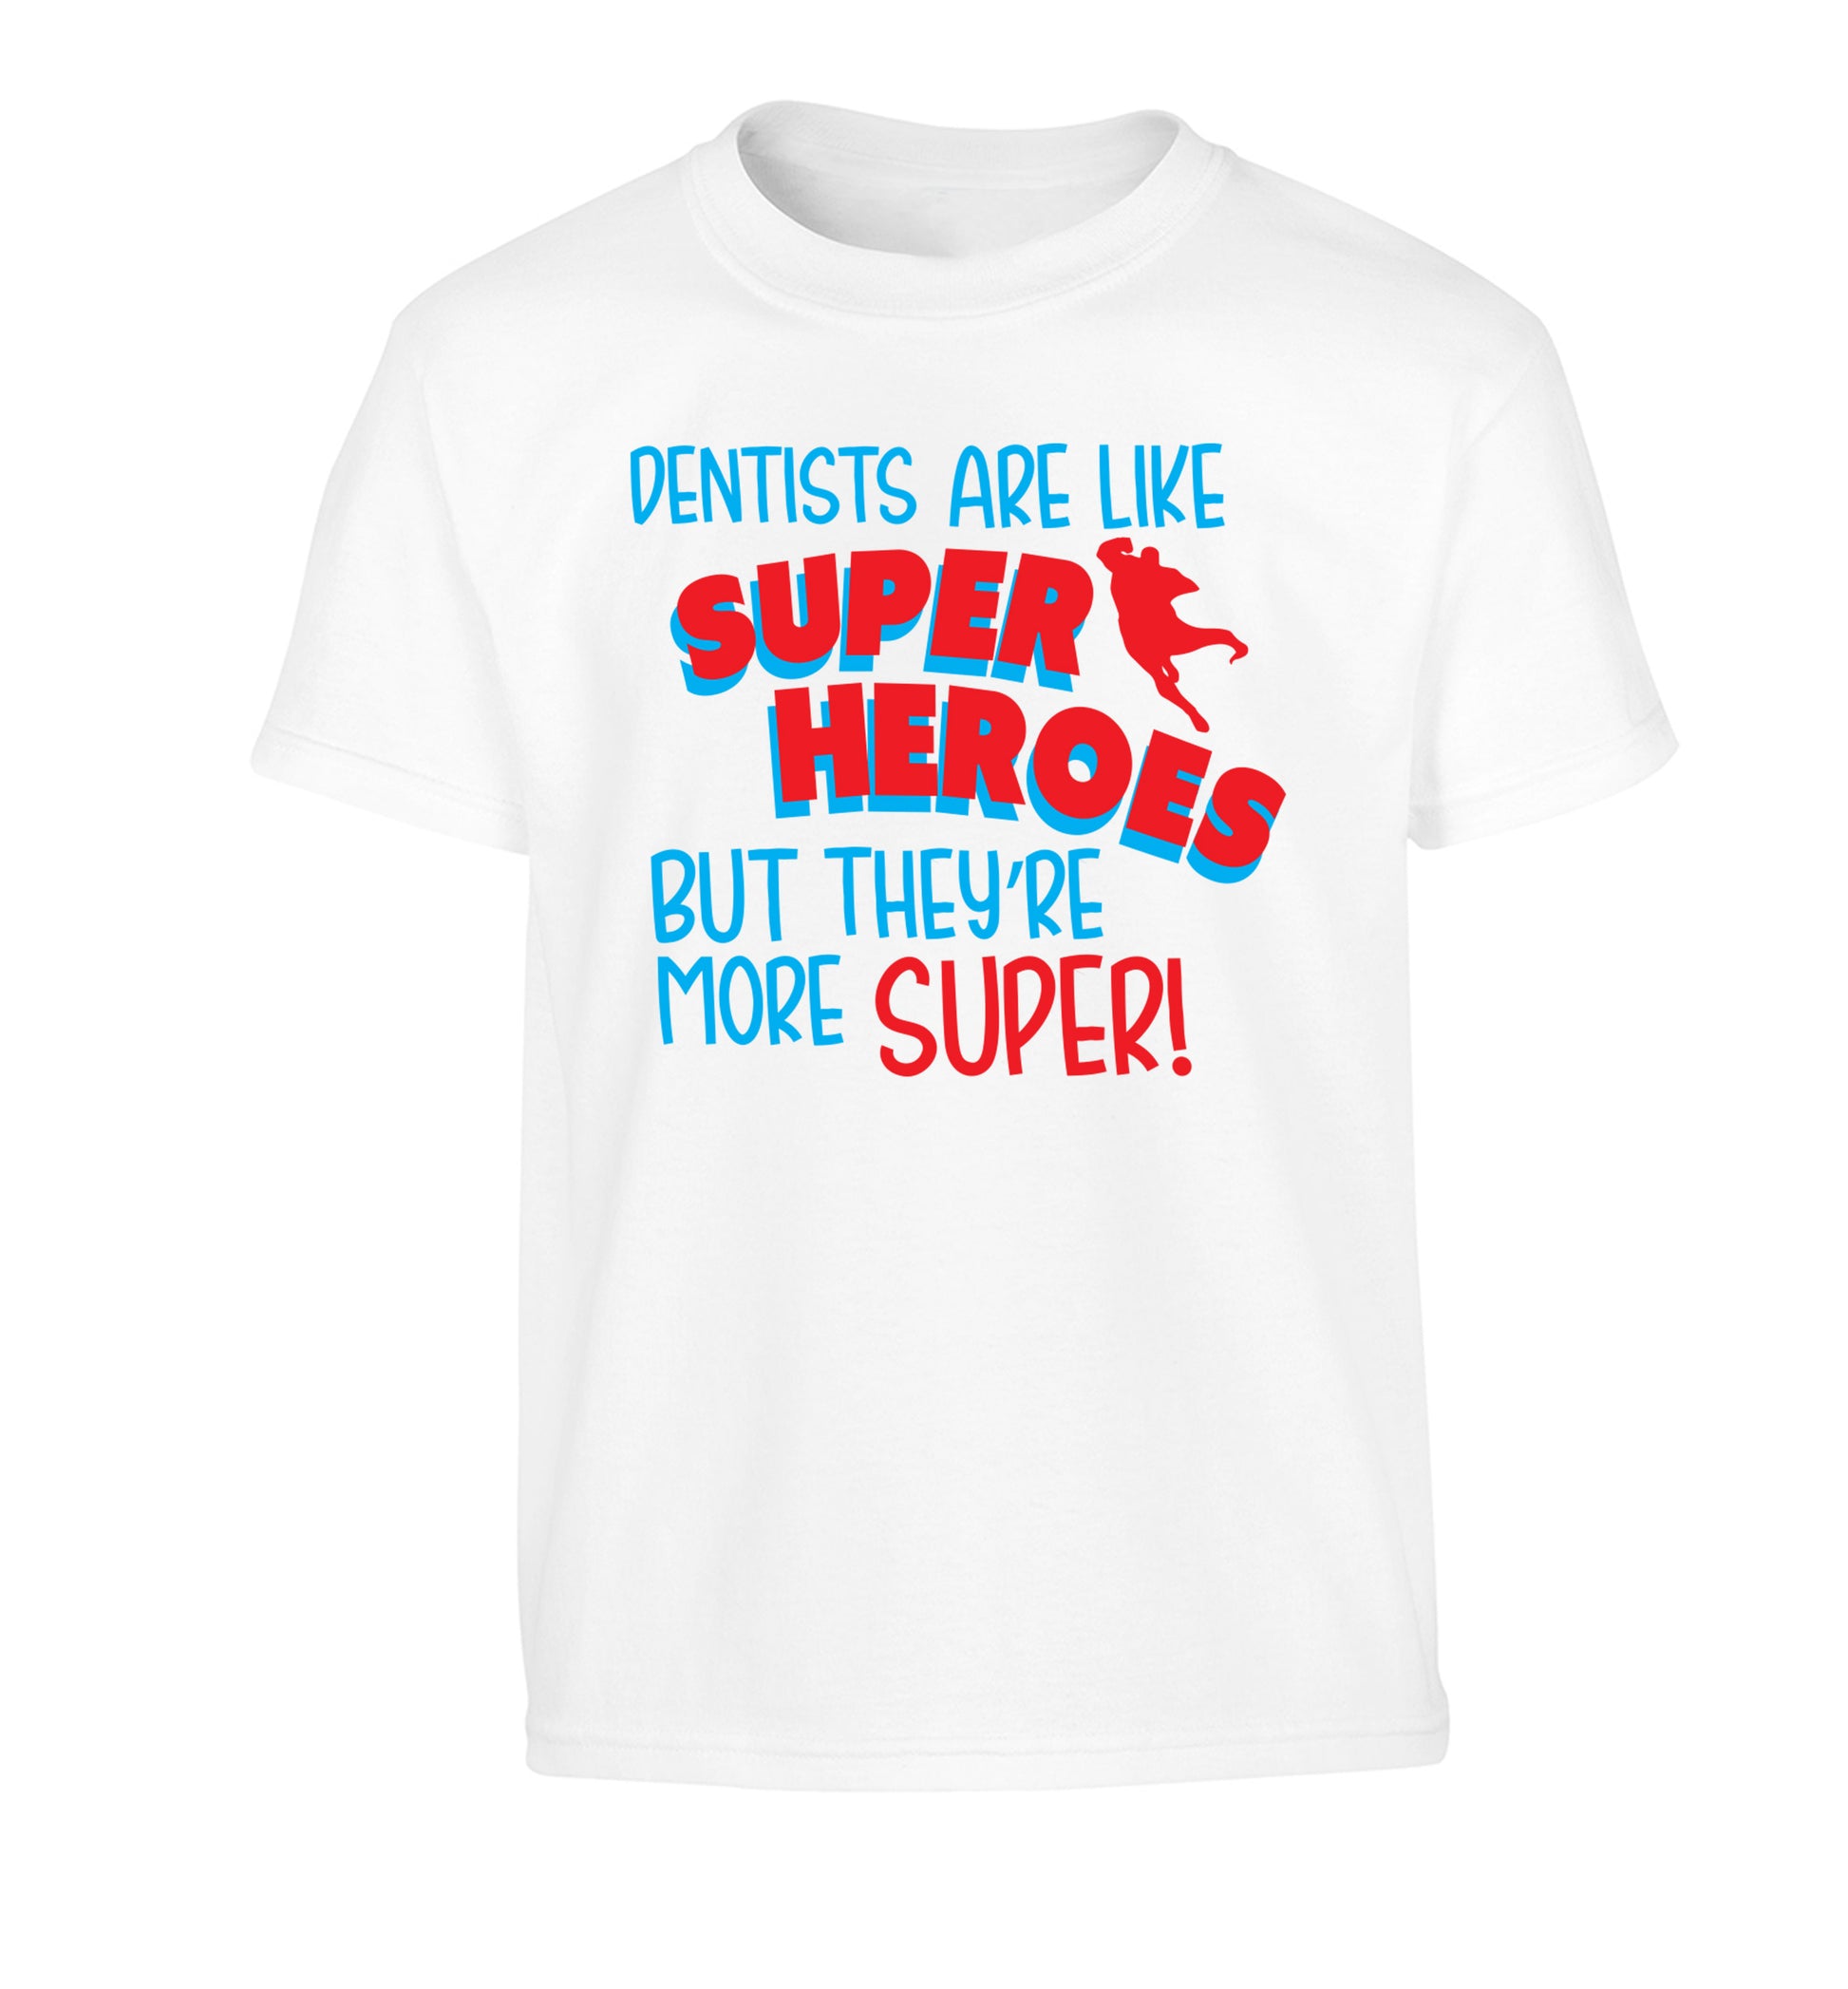 Dentists are like superheros but they're more super Children's white Tshirt 12-13 Years